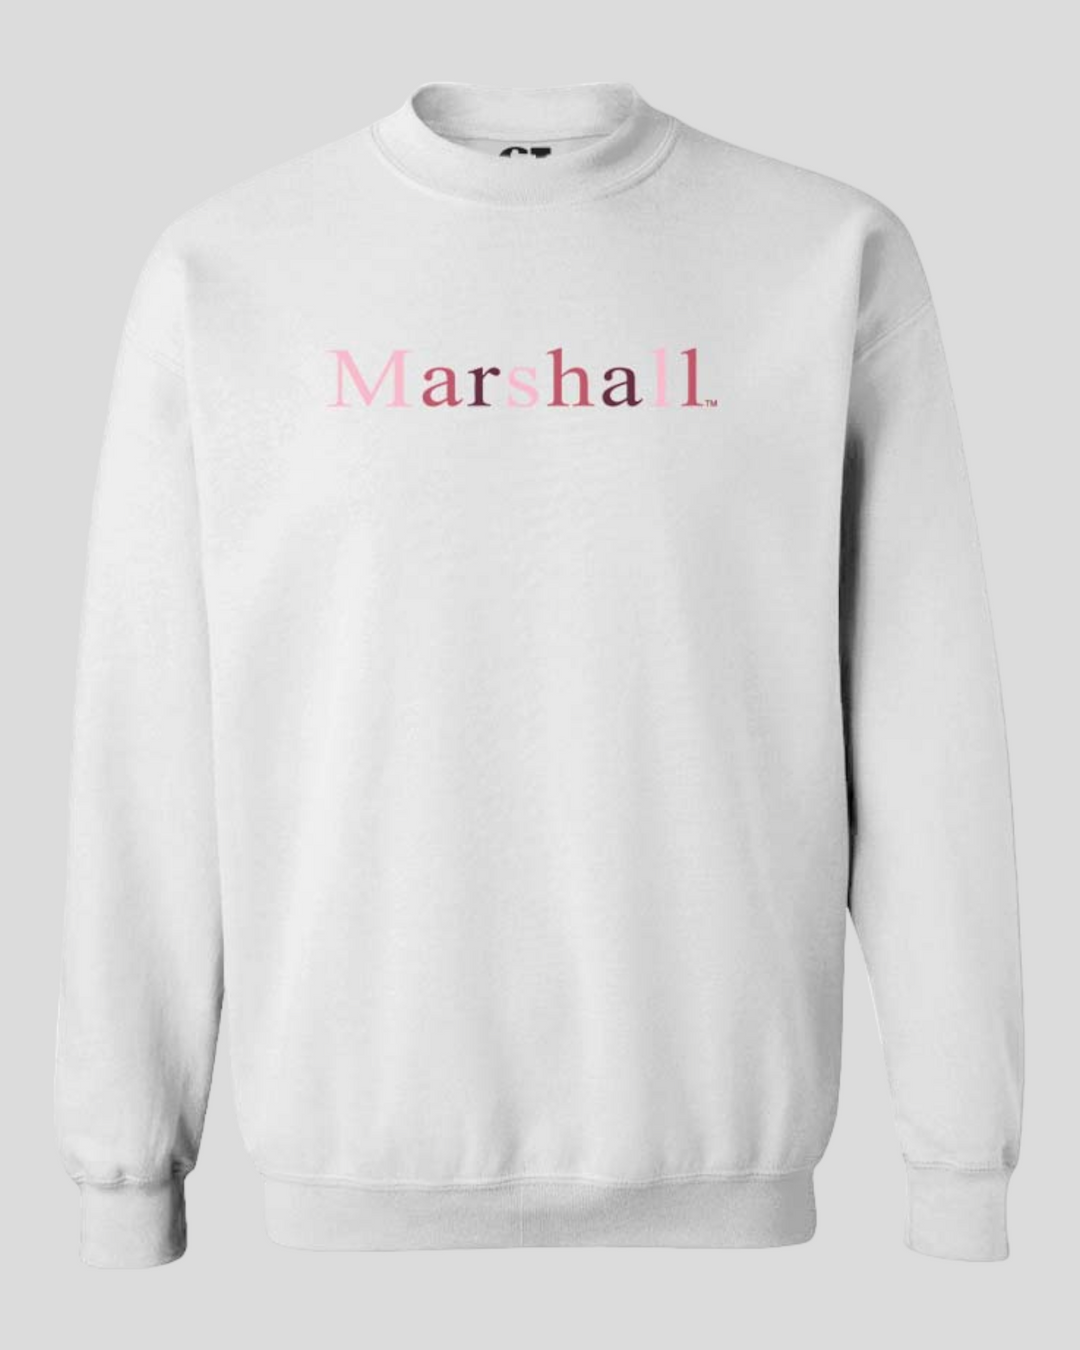 the team pink sweatshirt is shown in a flat lay and it is white with varying shades of pink letters spelling Marshall